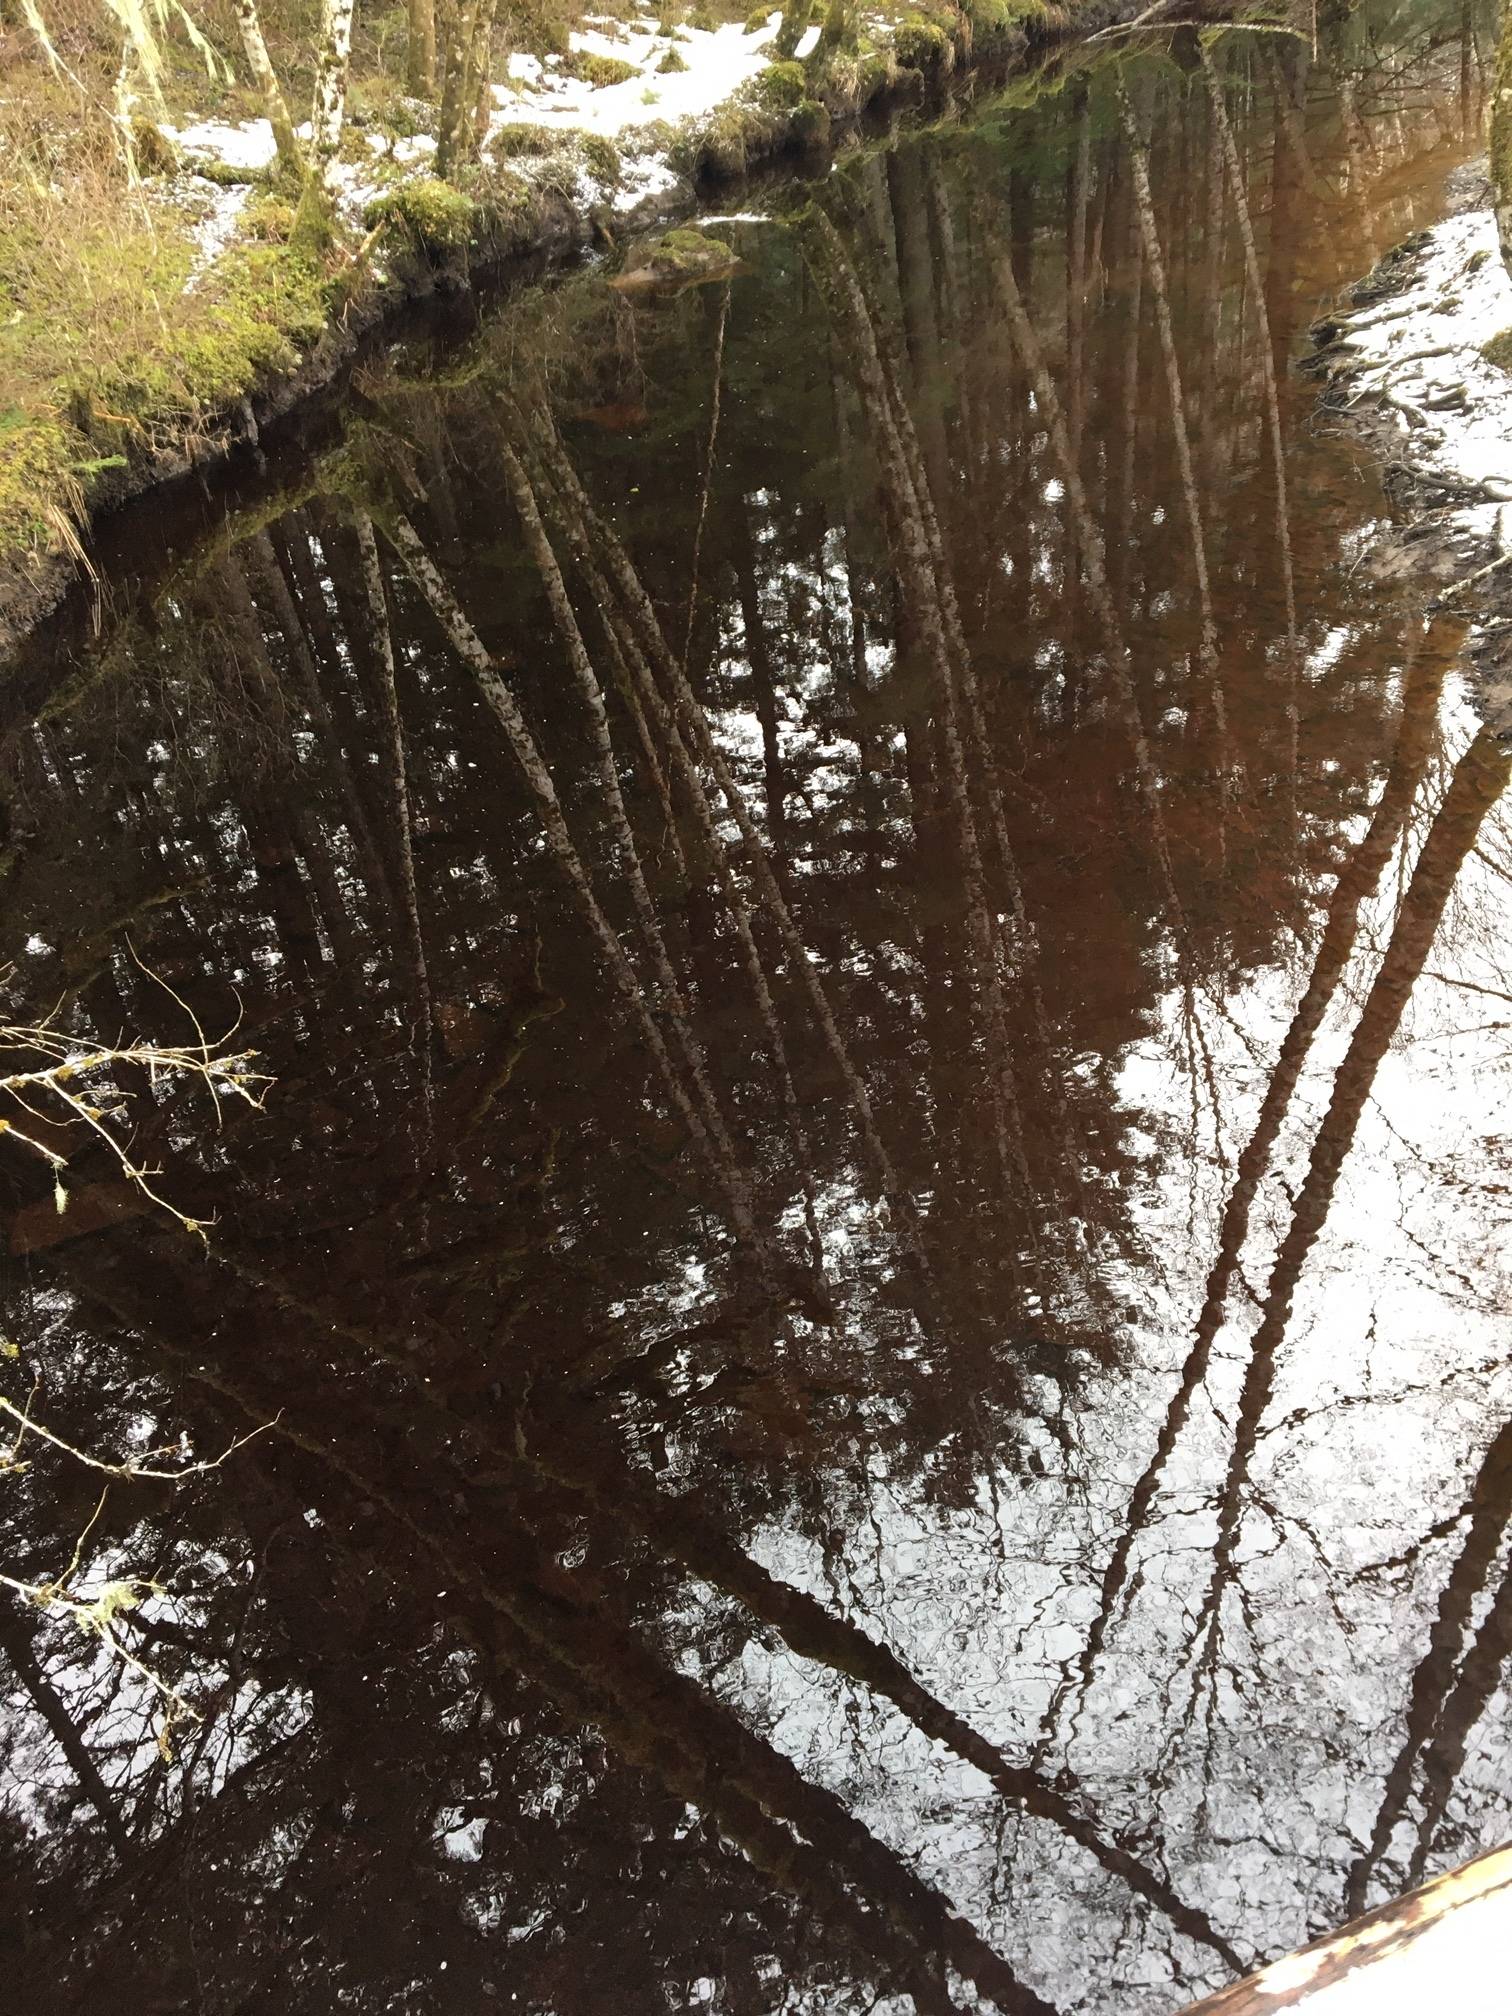 Forest reflections can be seen in the waters of Peterson Creek on Wednesday, March 4, 2020. (Courtesy Photo | Denise Caroll)